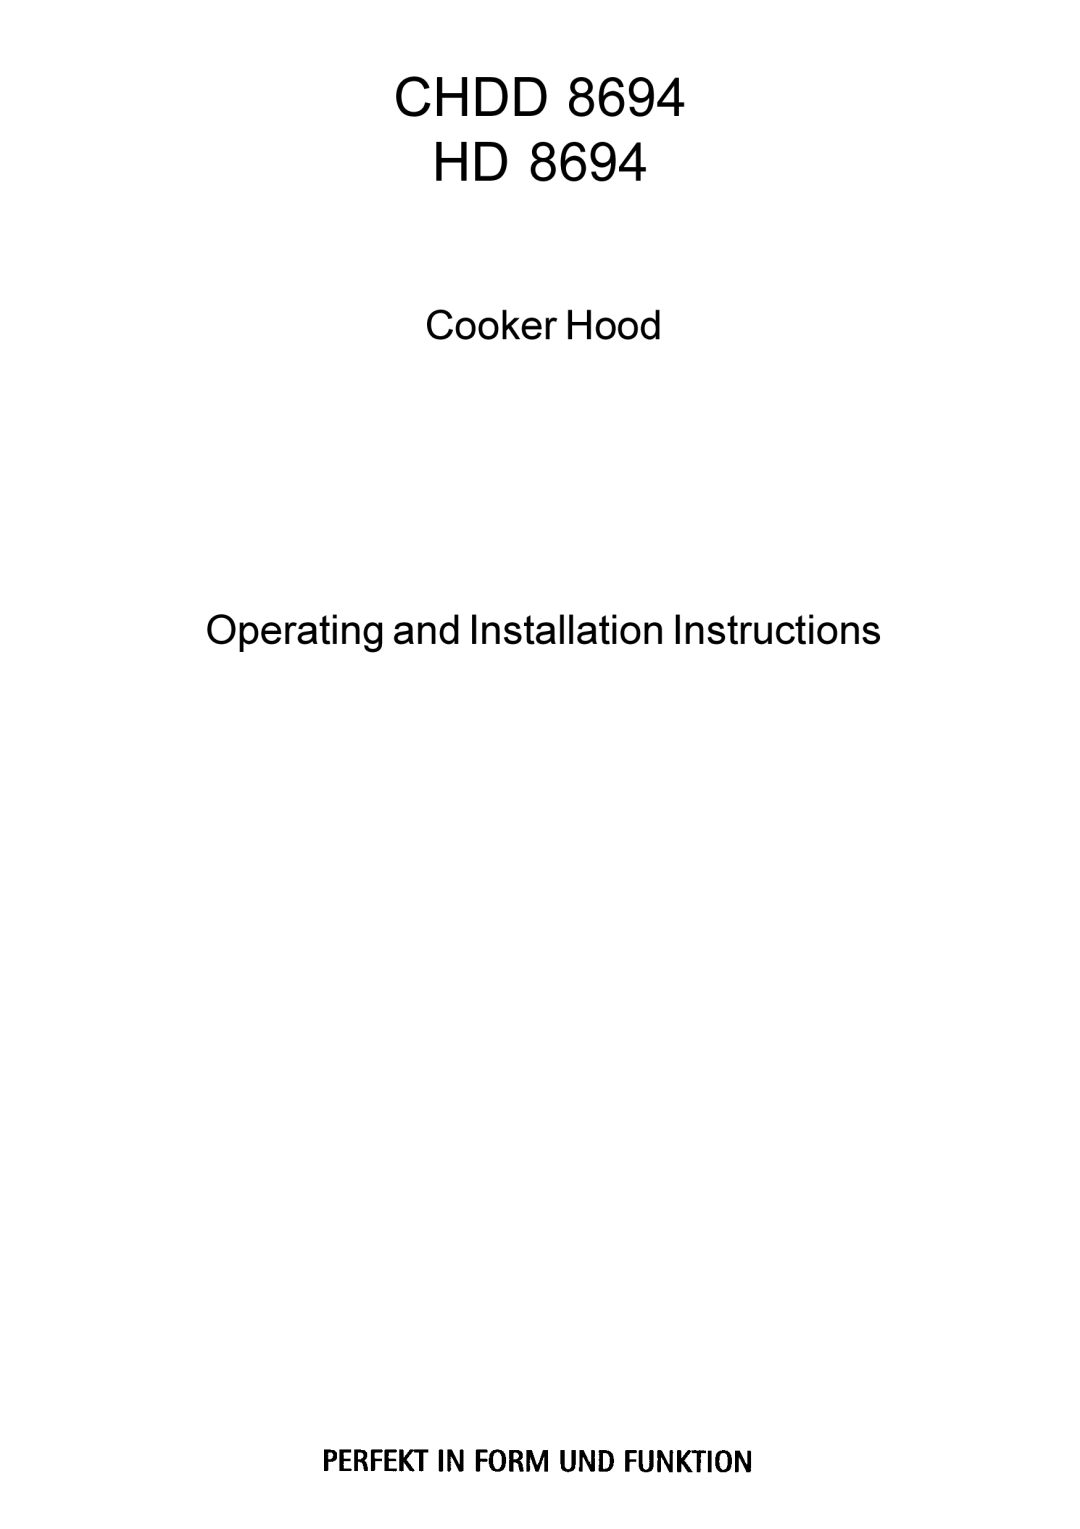 Electrolux HD 8694 installation instructions Chdd Hd, Cooker Hood Operating and Installation Instructions 